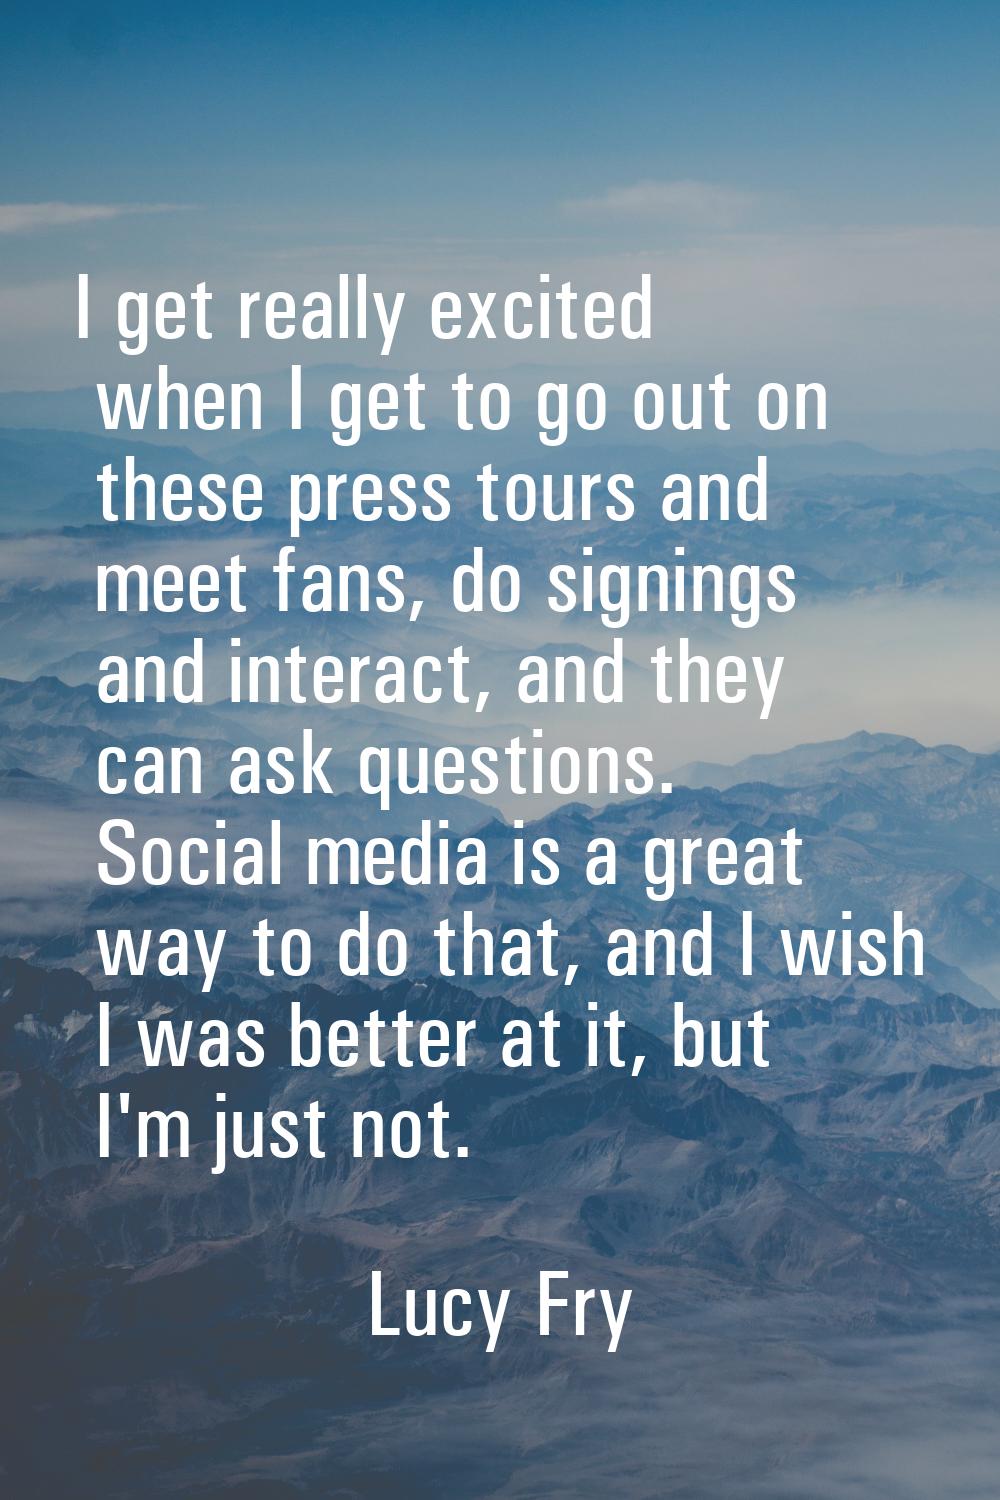 I get really excited when I get to go out on these press tours and meet fans, do signings and inter